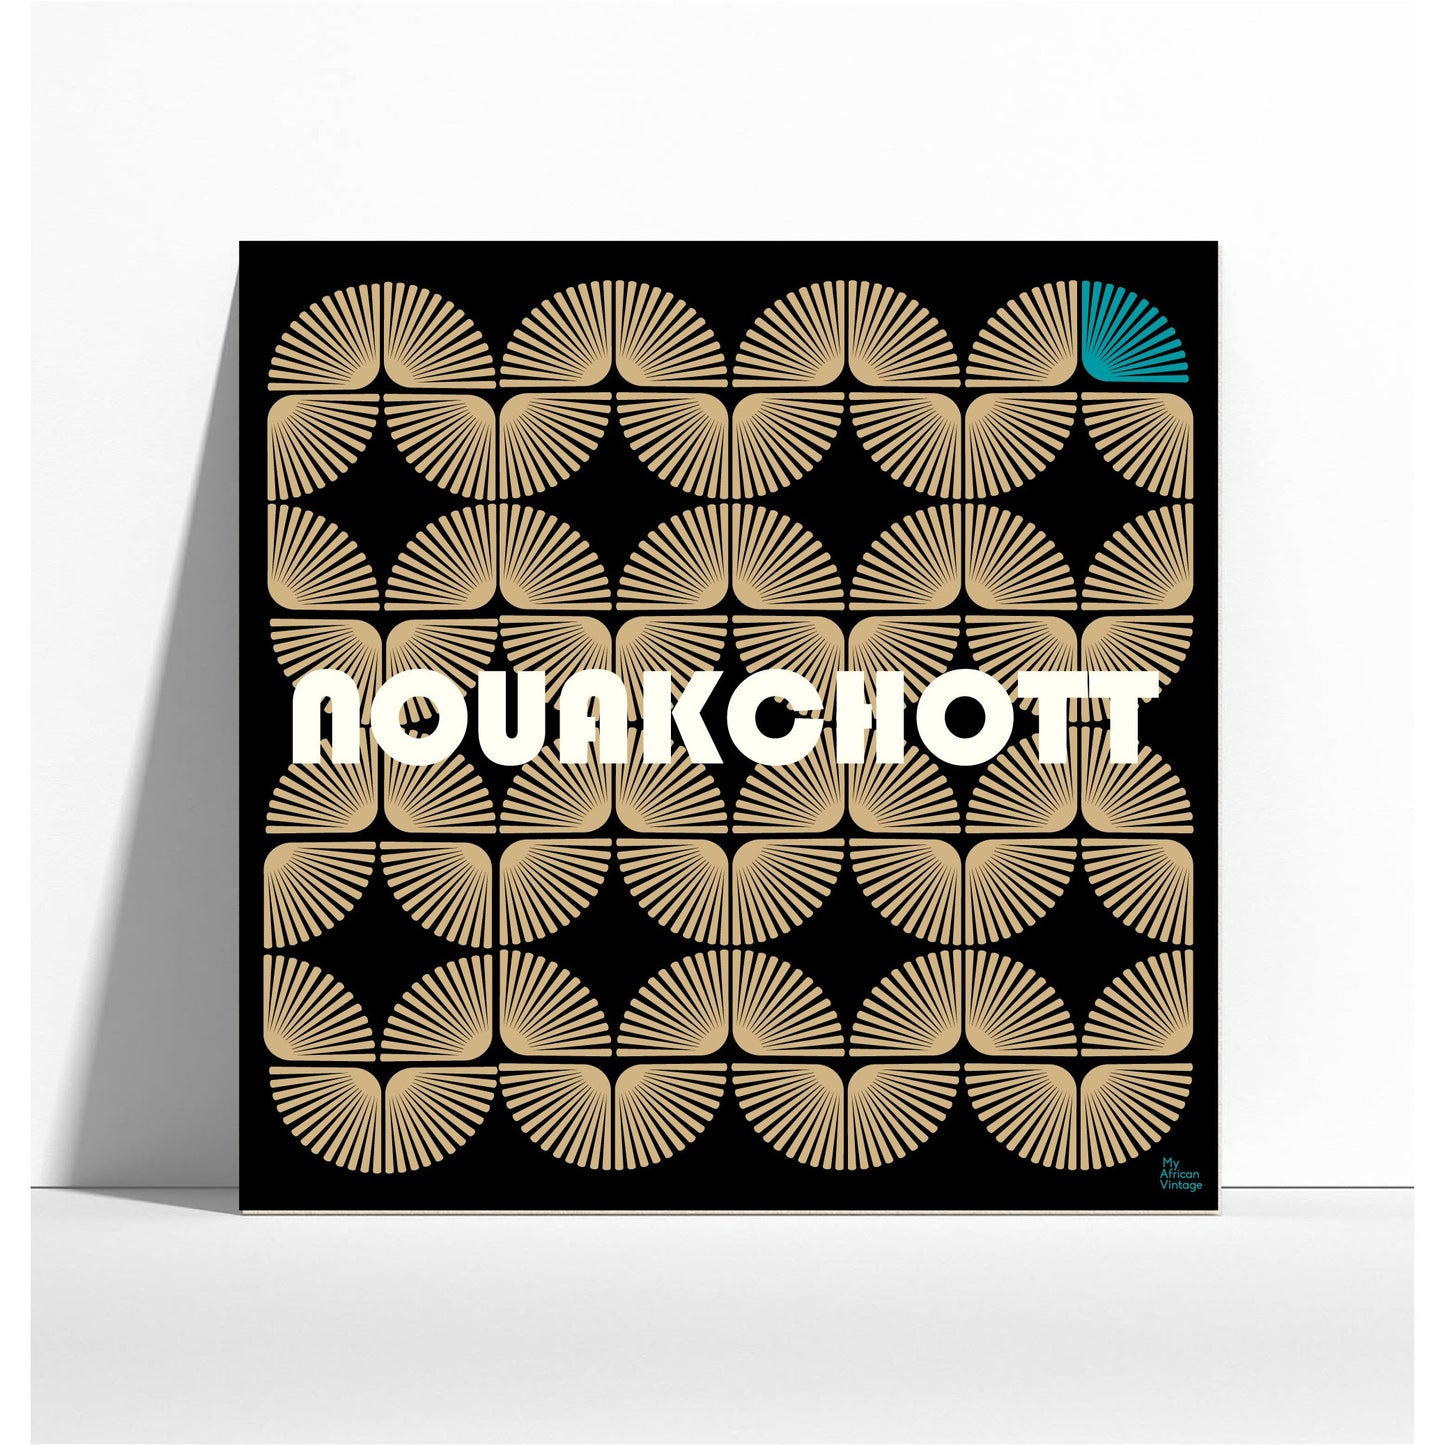 "Nouakchott" retro style poster - "My African Vintage" collection